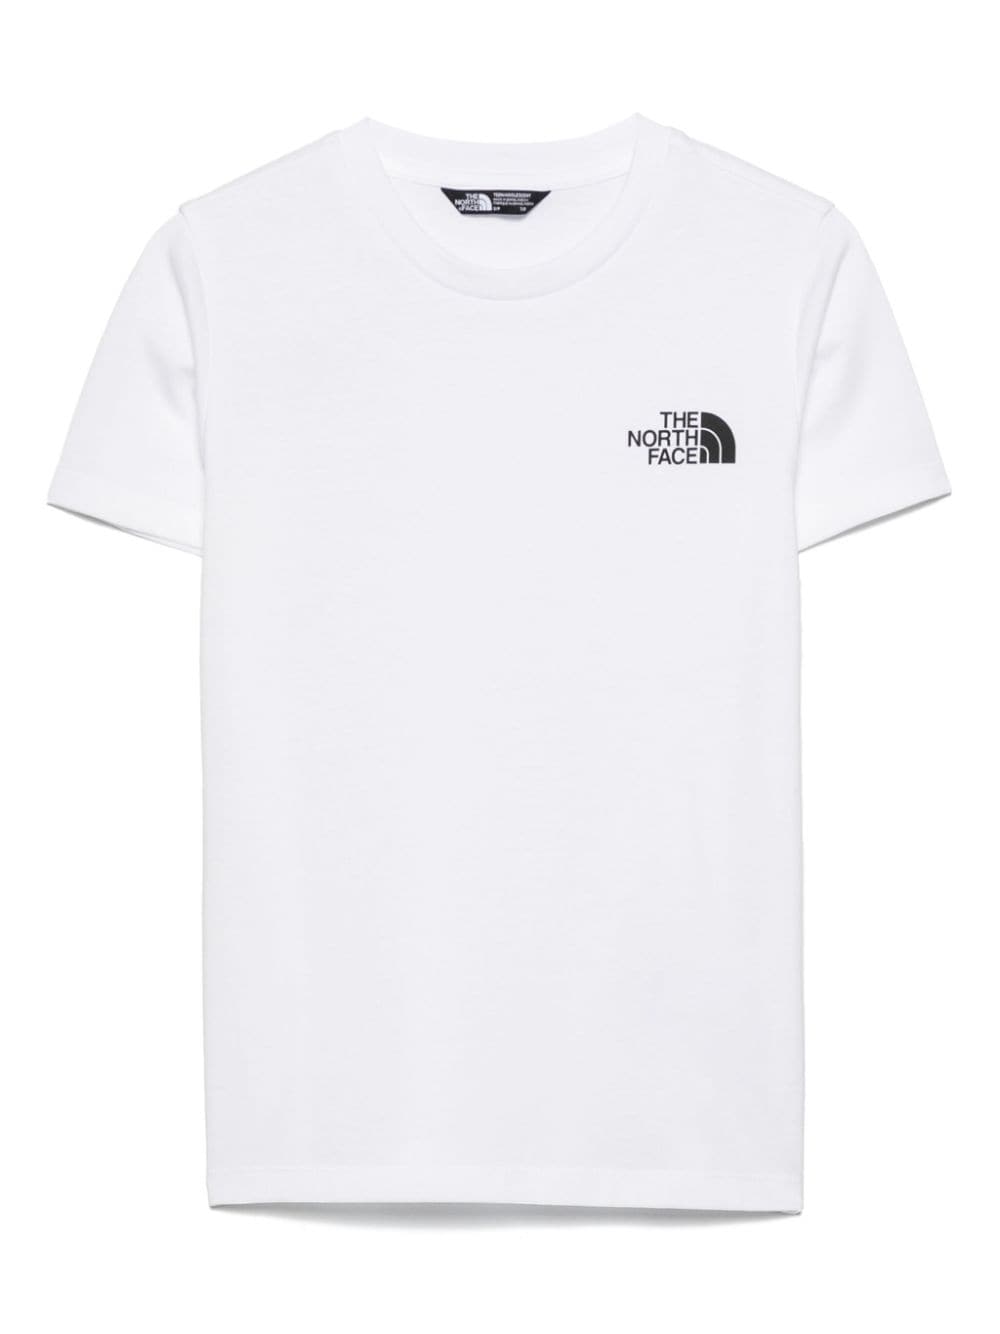 The North Face Kids' Simple Dome T-shirt In White